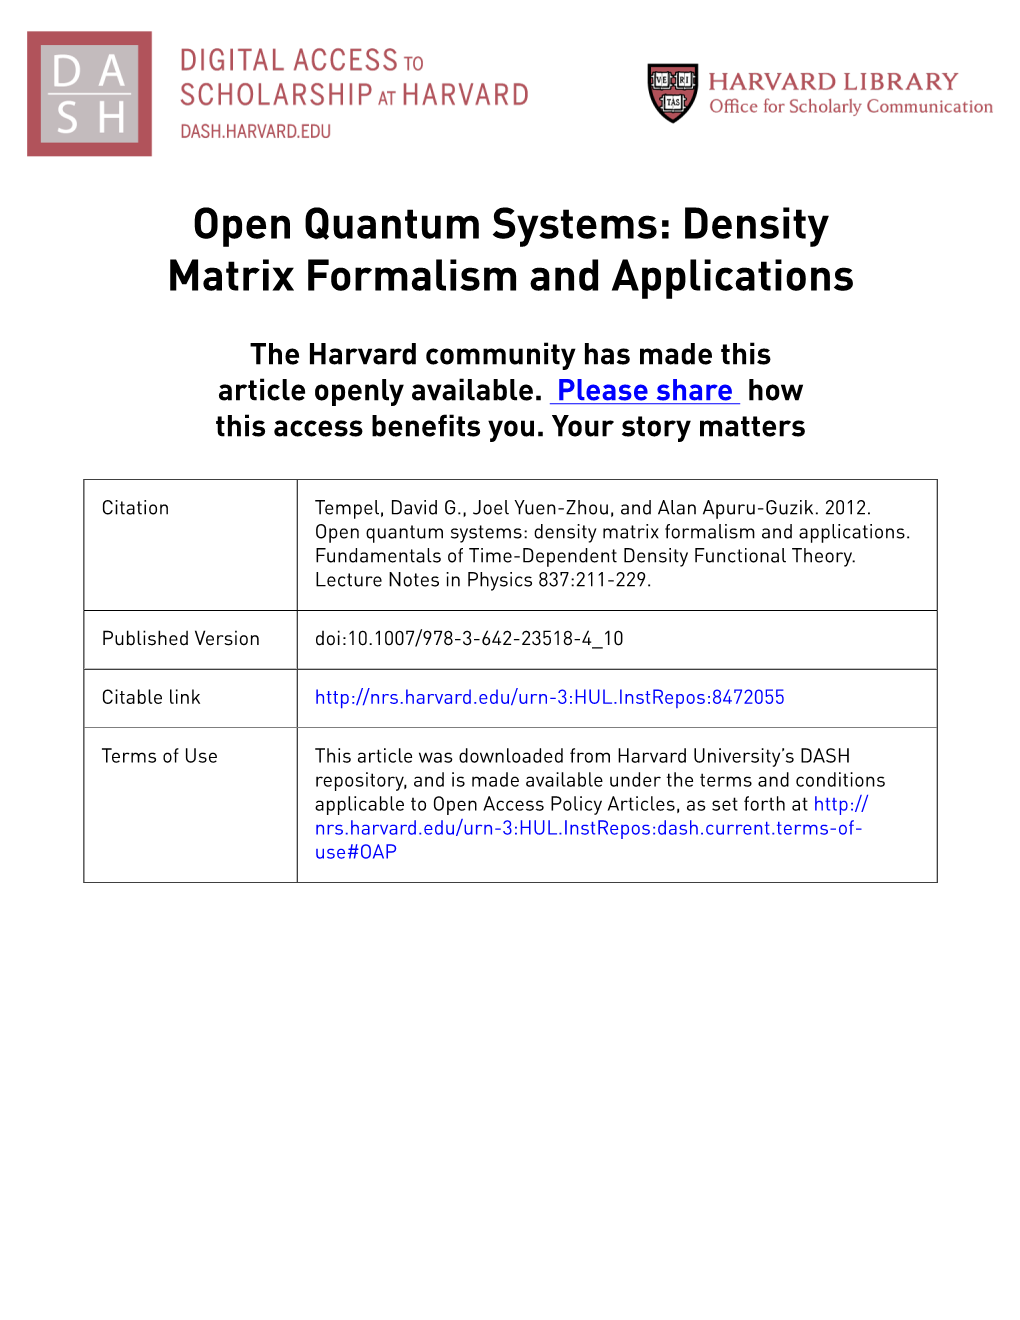 Open Quantum Systems: Density Matrix Formalism and Applications